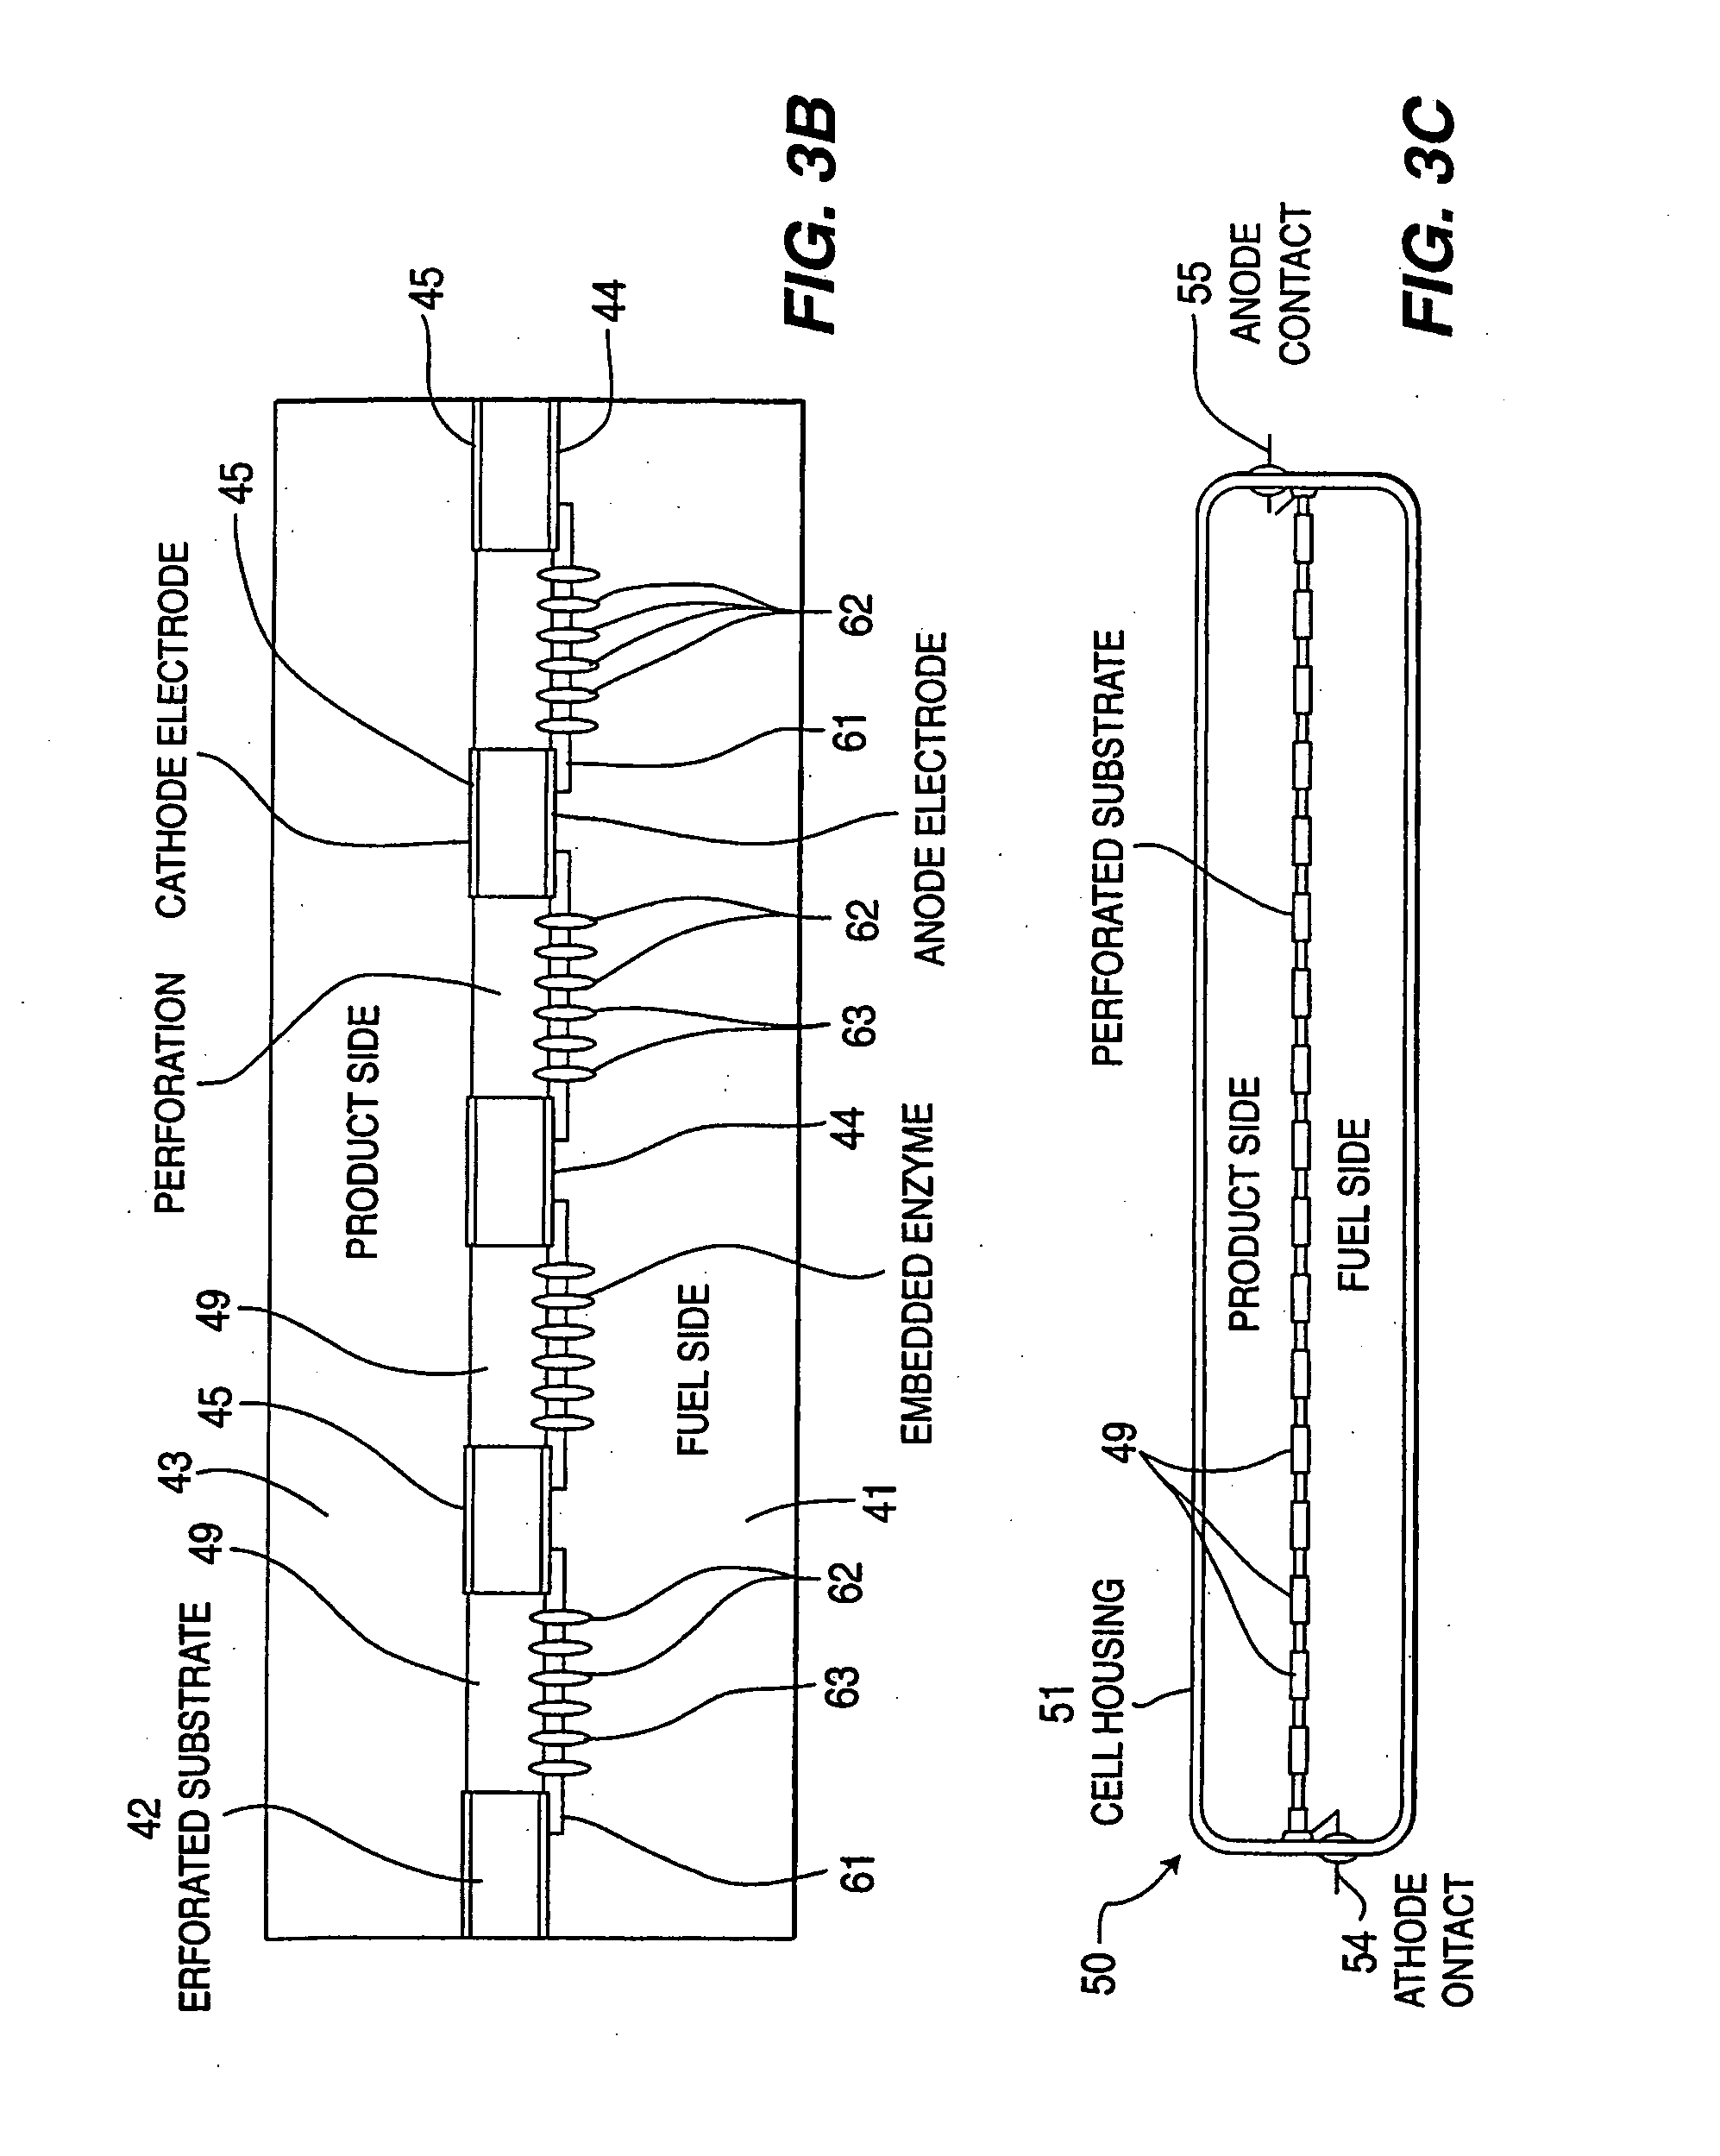 Enzymatic fuel cell with membrane bound redox enzyme